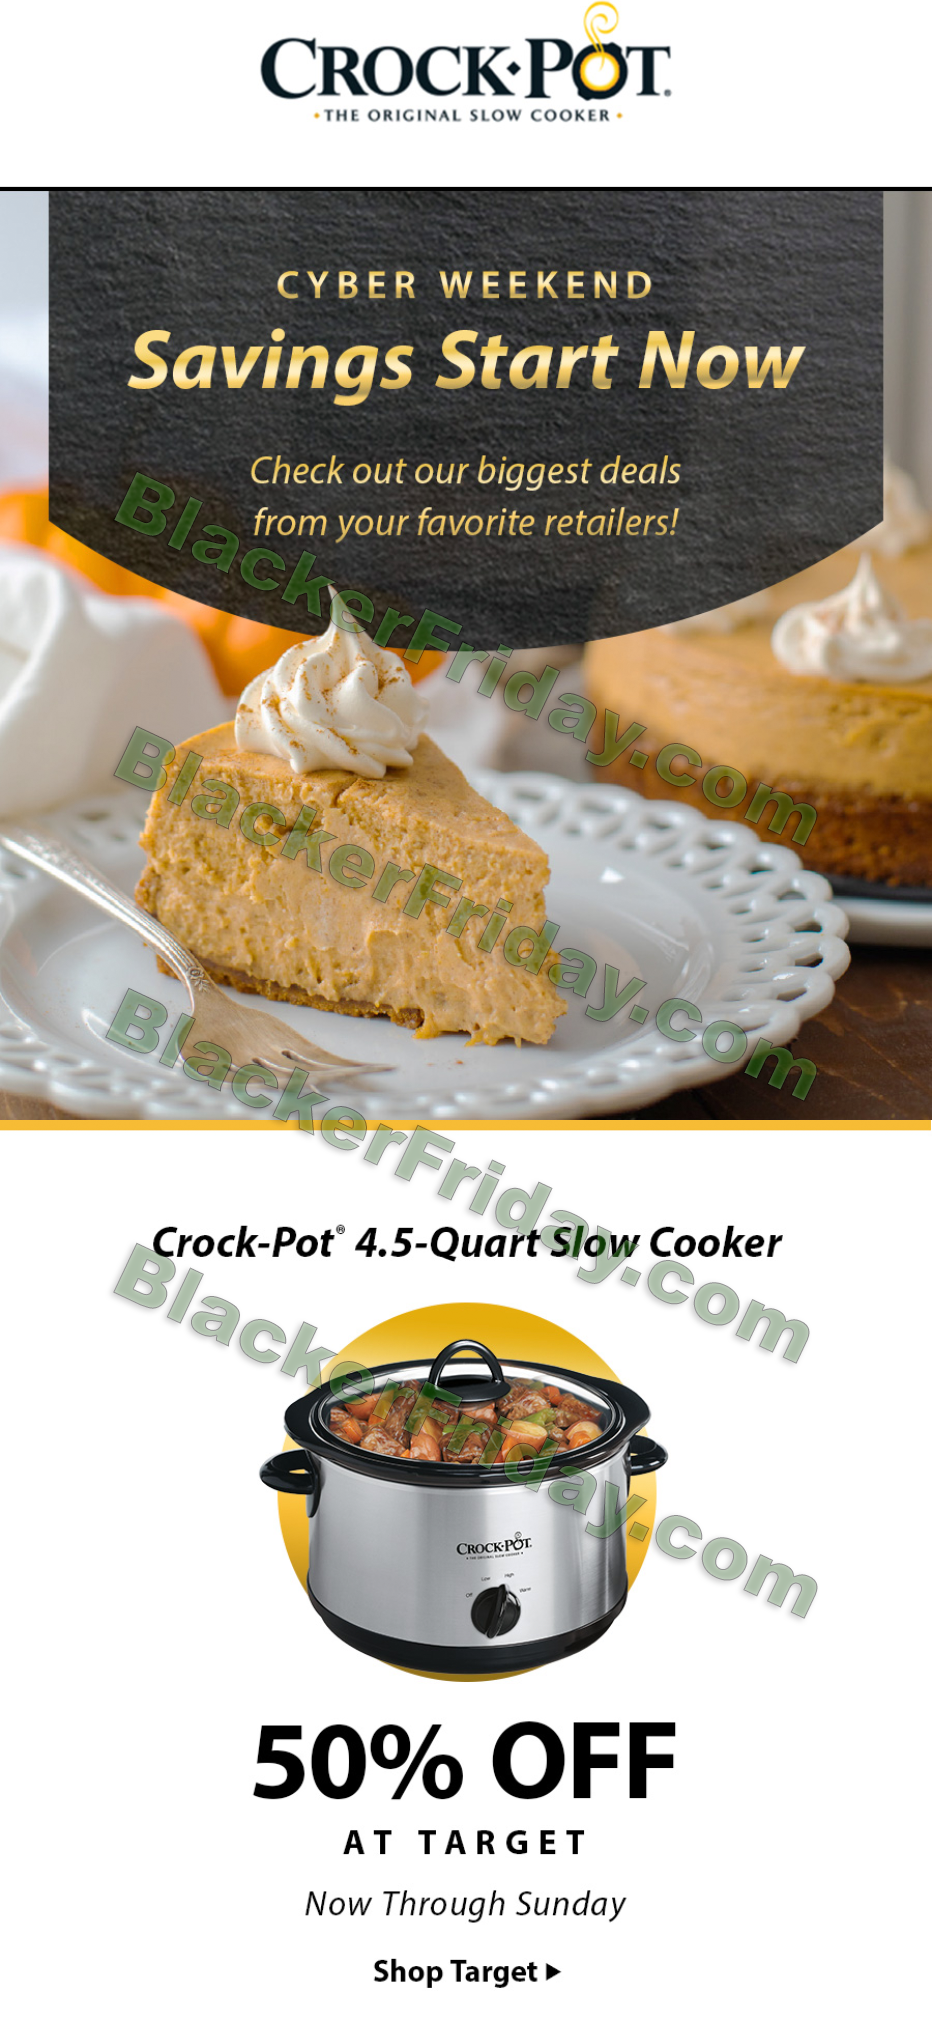 Crock Pot Black Friday 2020 Sale - What to Expect - Blacker Friday